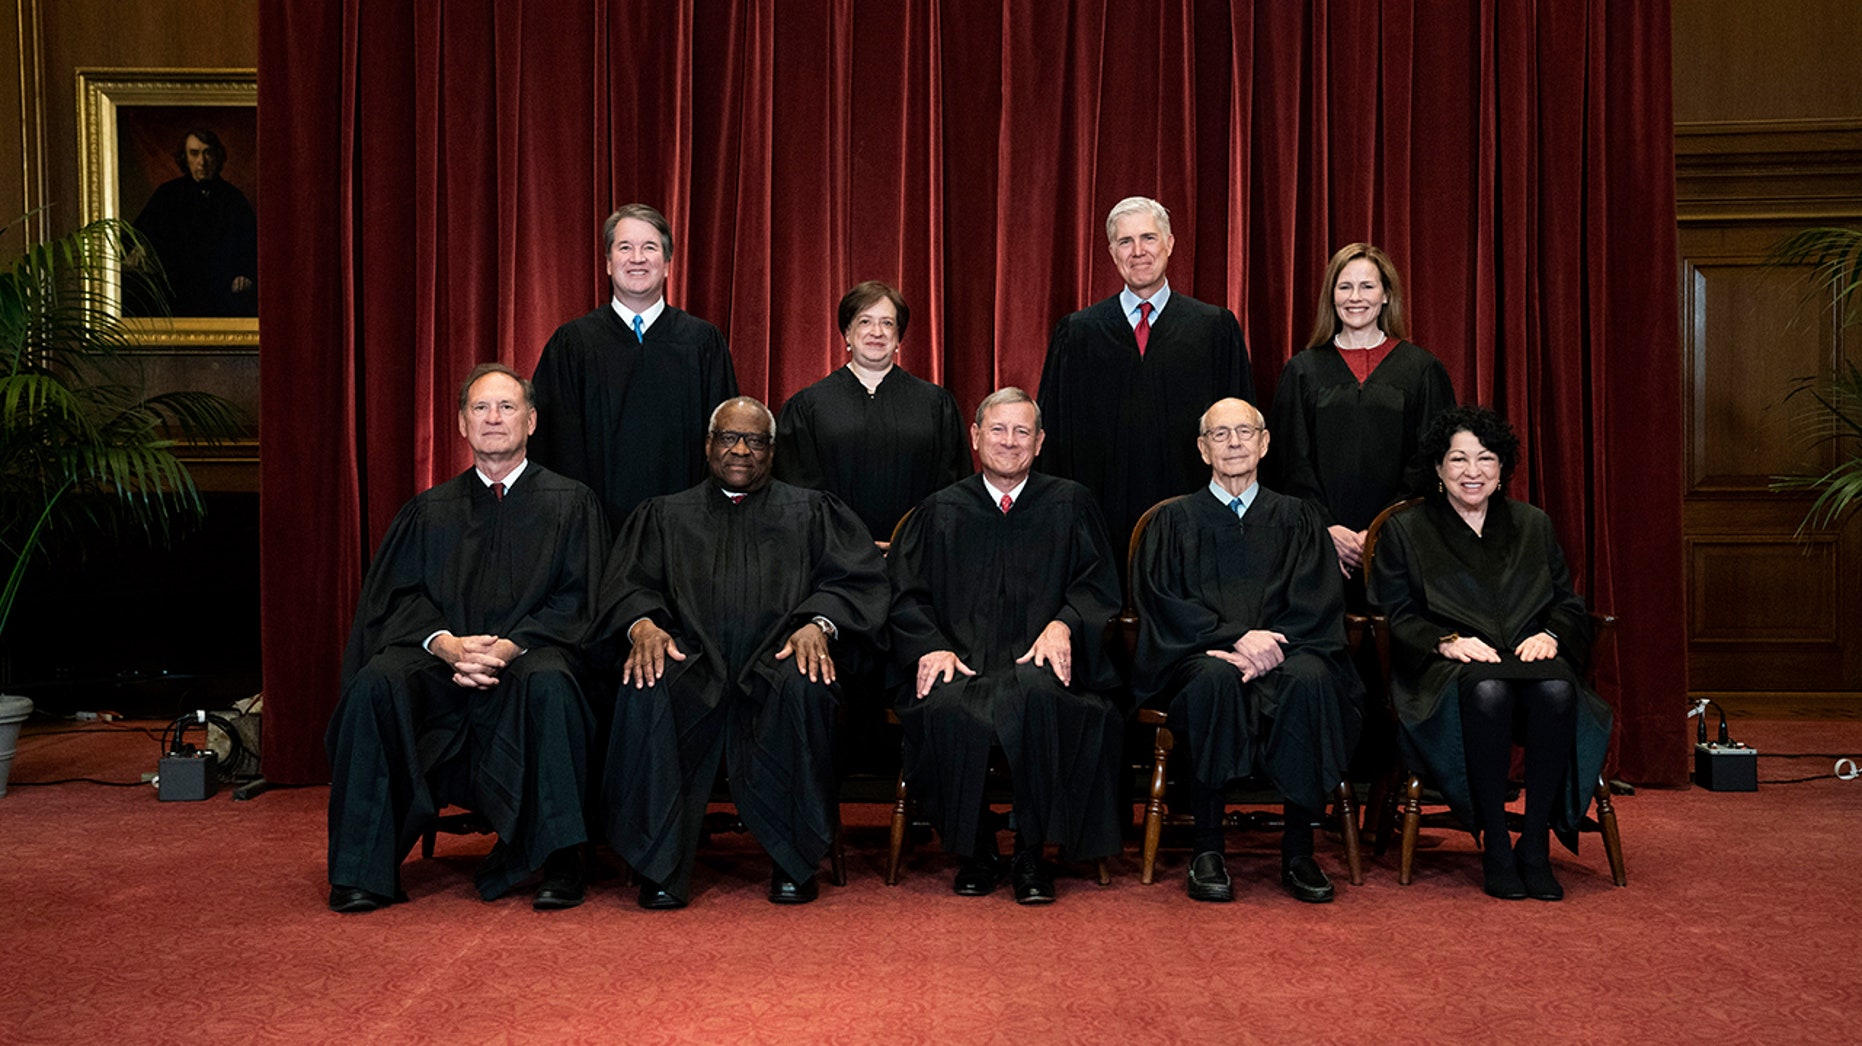 photo of Supreme Court Justices not available